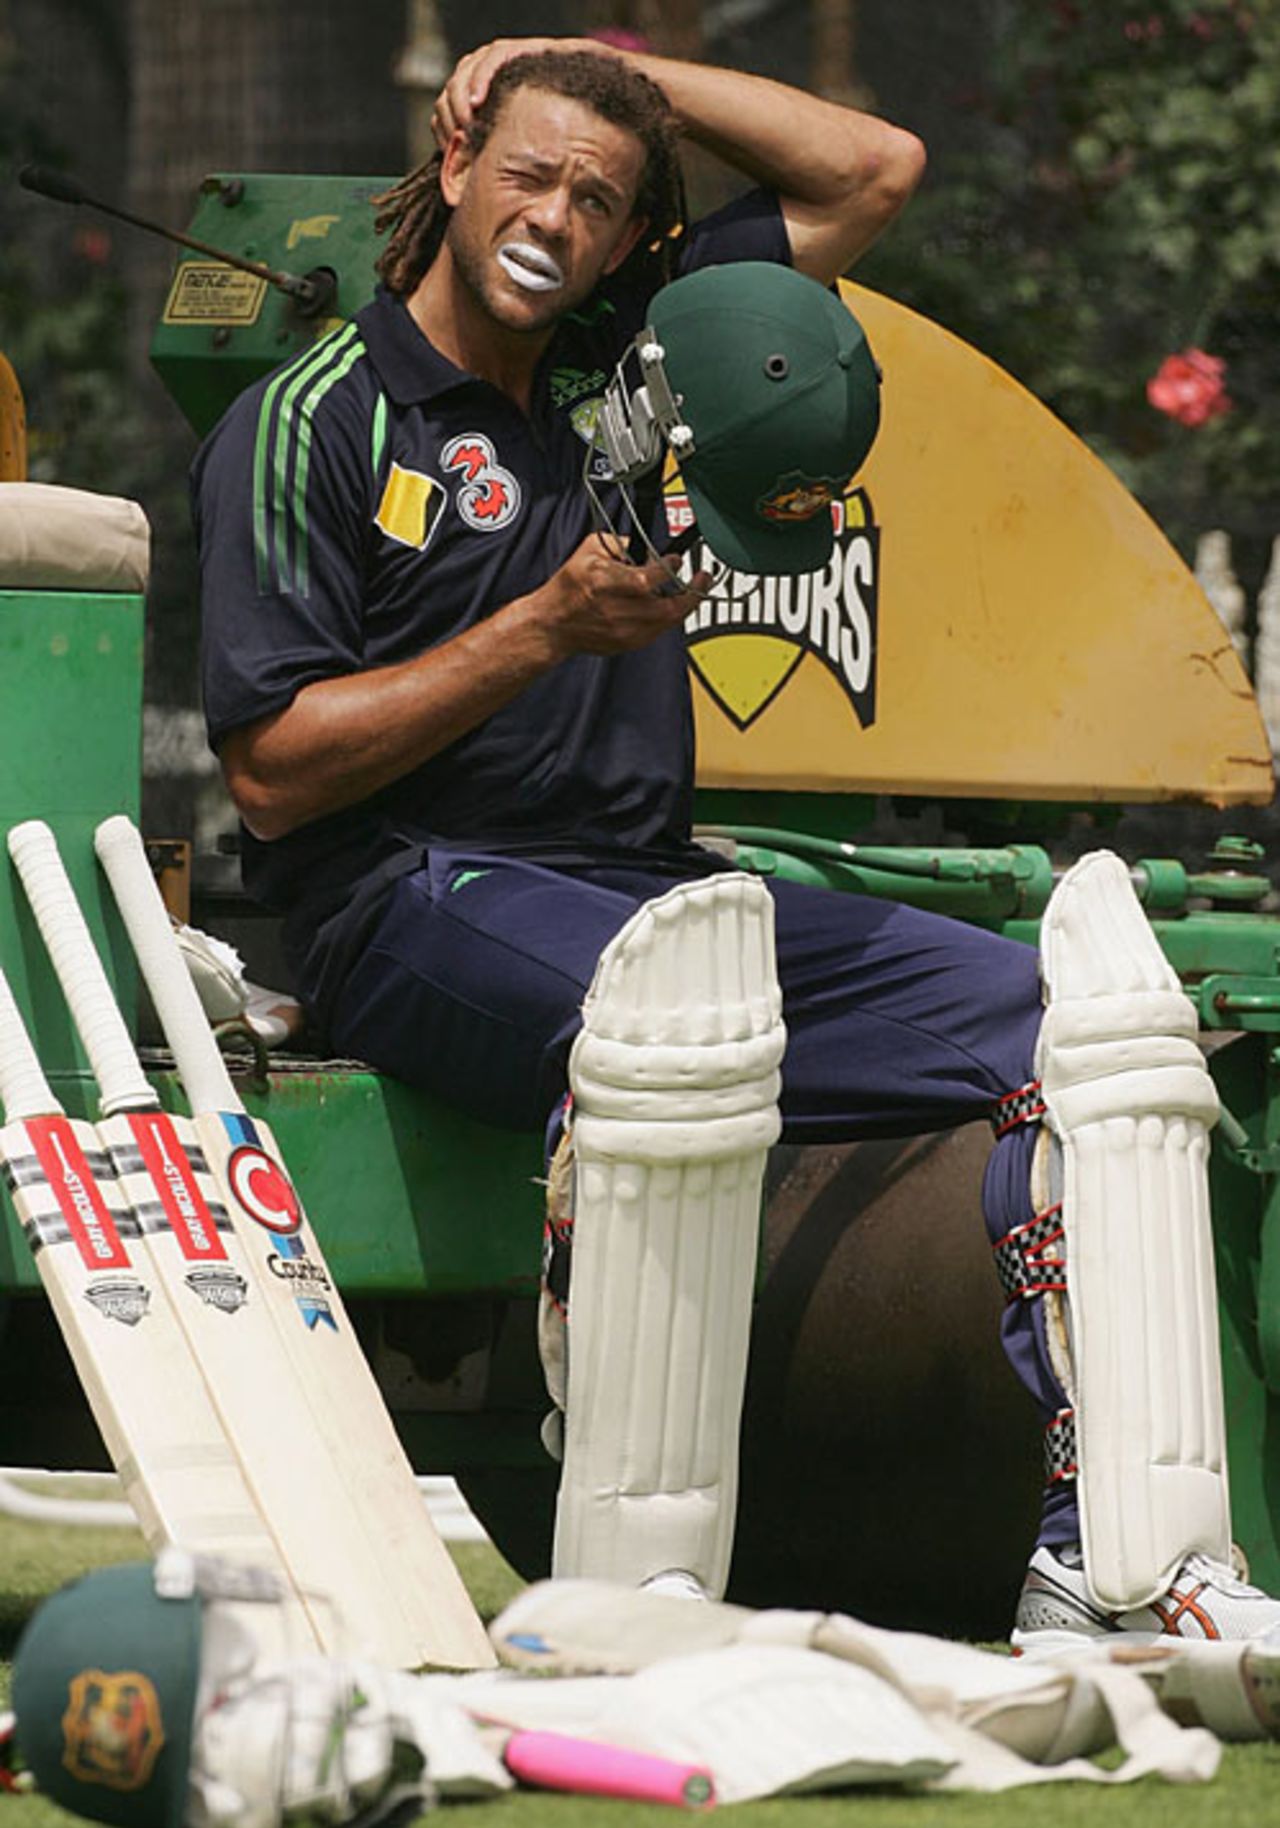 Andrew Symonds waits for his turn in the nets ahead of the third Test, Perth, December 11, 2006